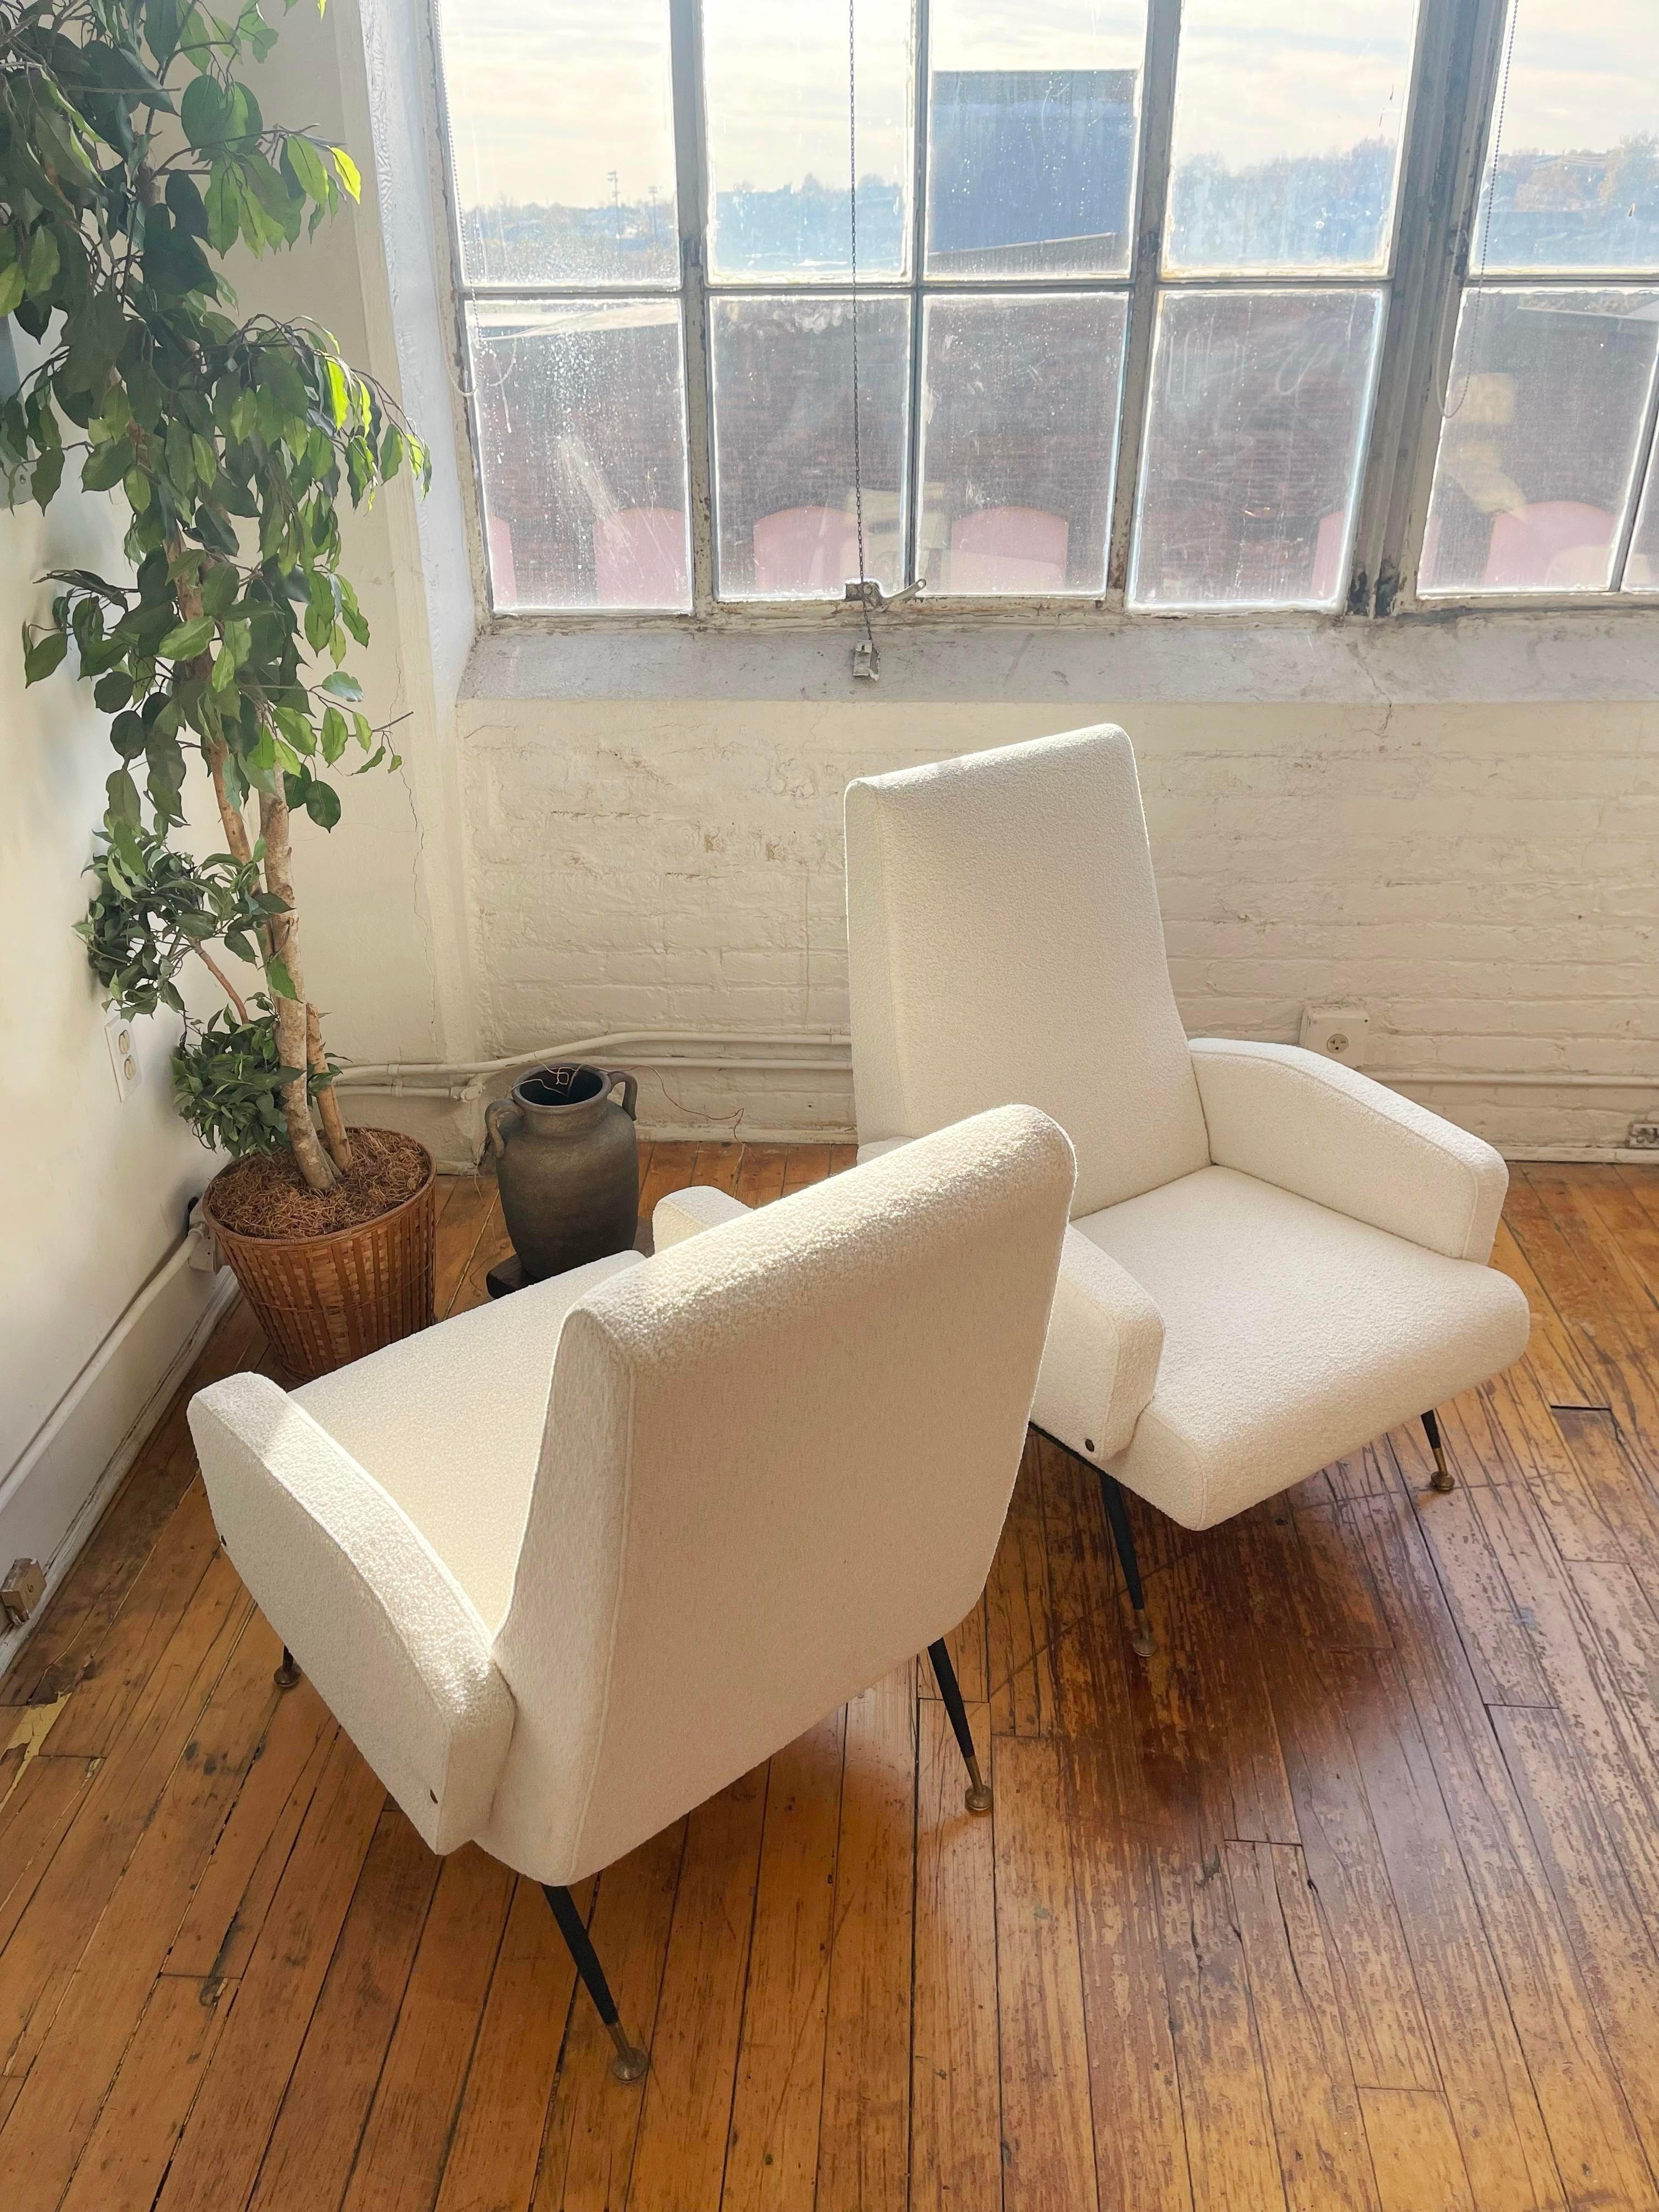 1950s Nino Zoncada Italian Lounge Chairs, Newly Upholstered in White Boucle In Good Condition For Sale In Jersey City, NJ